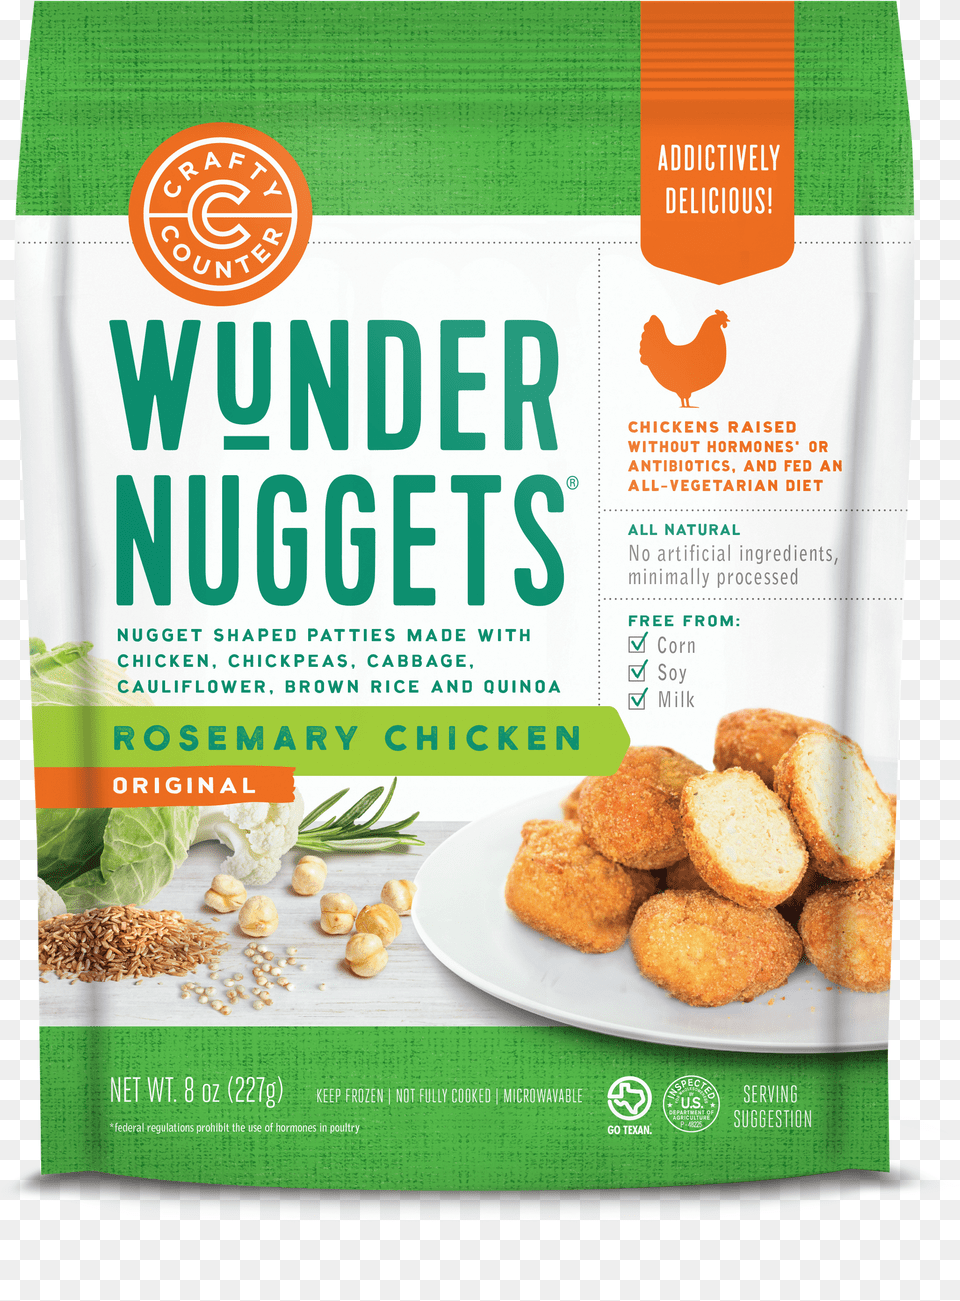 Original Rosemary Chicken Wunder Nuggets Png